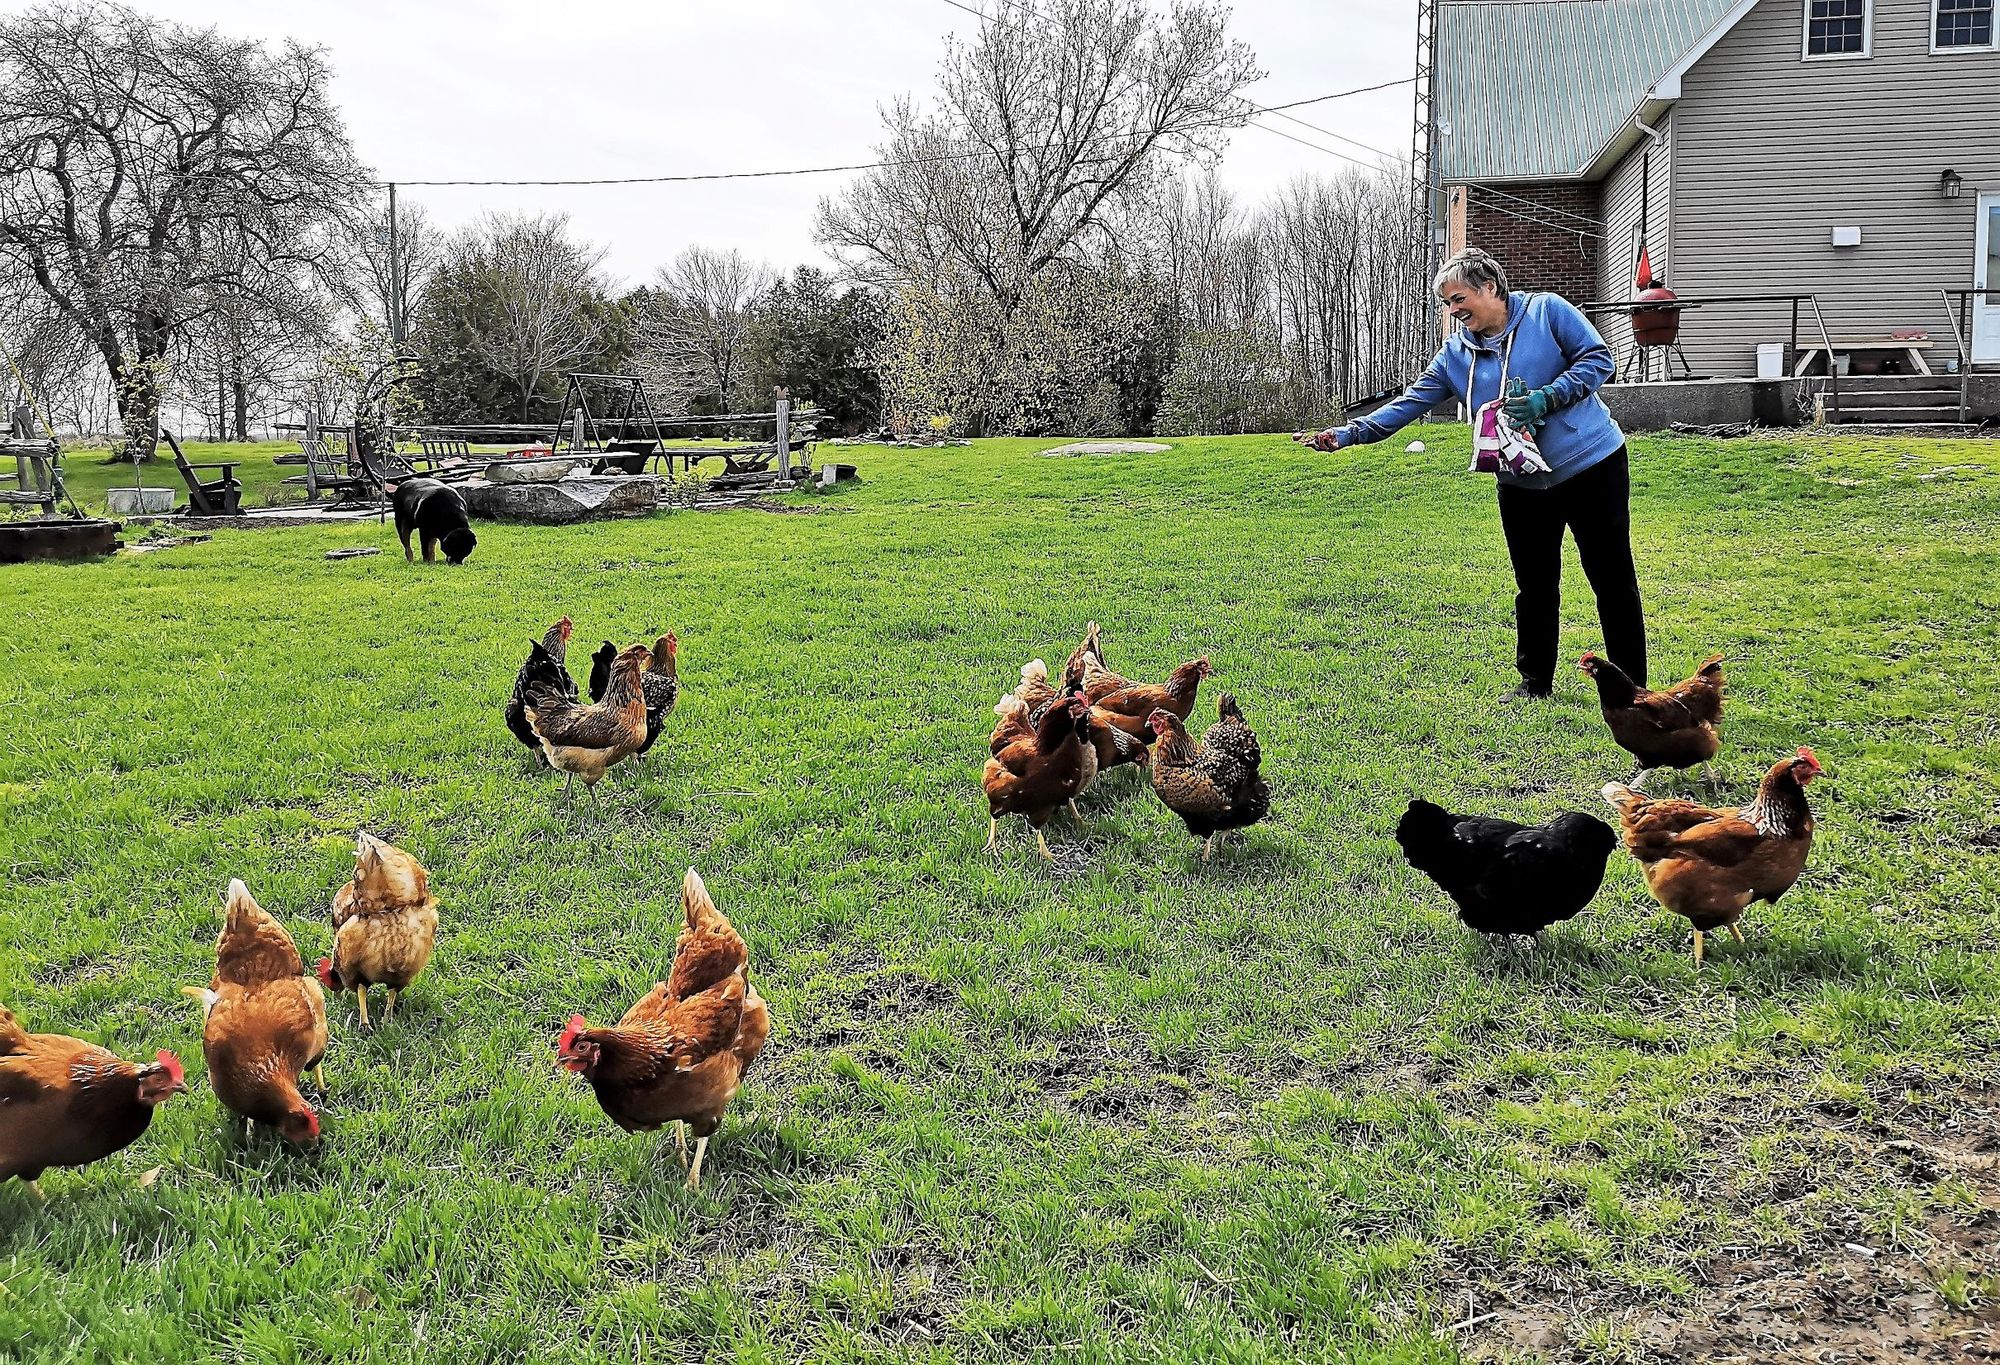 Chickens as pets – owners in love with their feathered friends